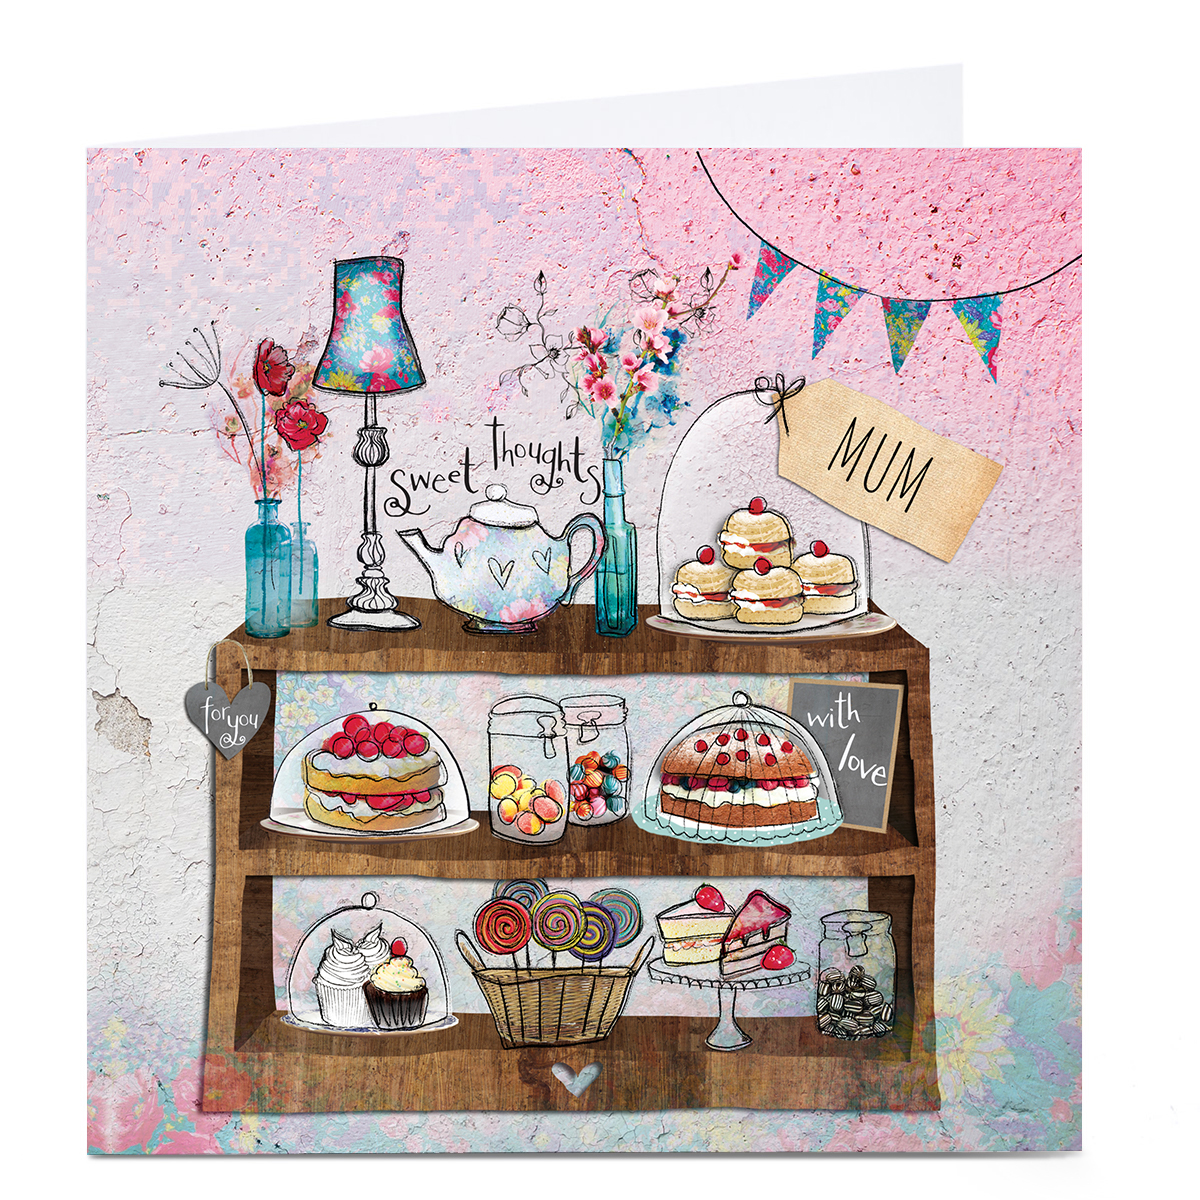 Personalised Emma Valenghi Card - Sweet Thoughts